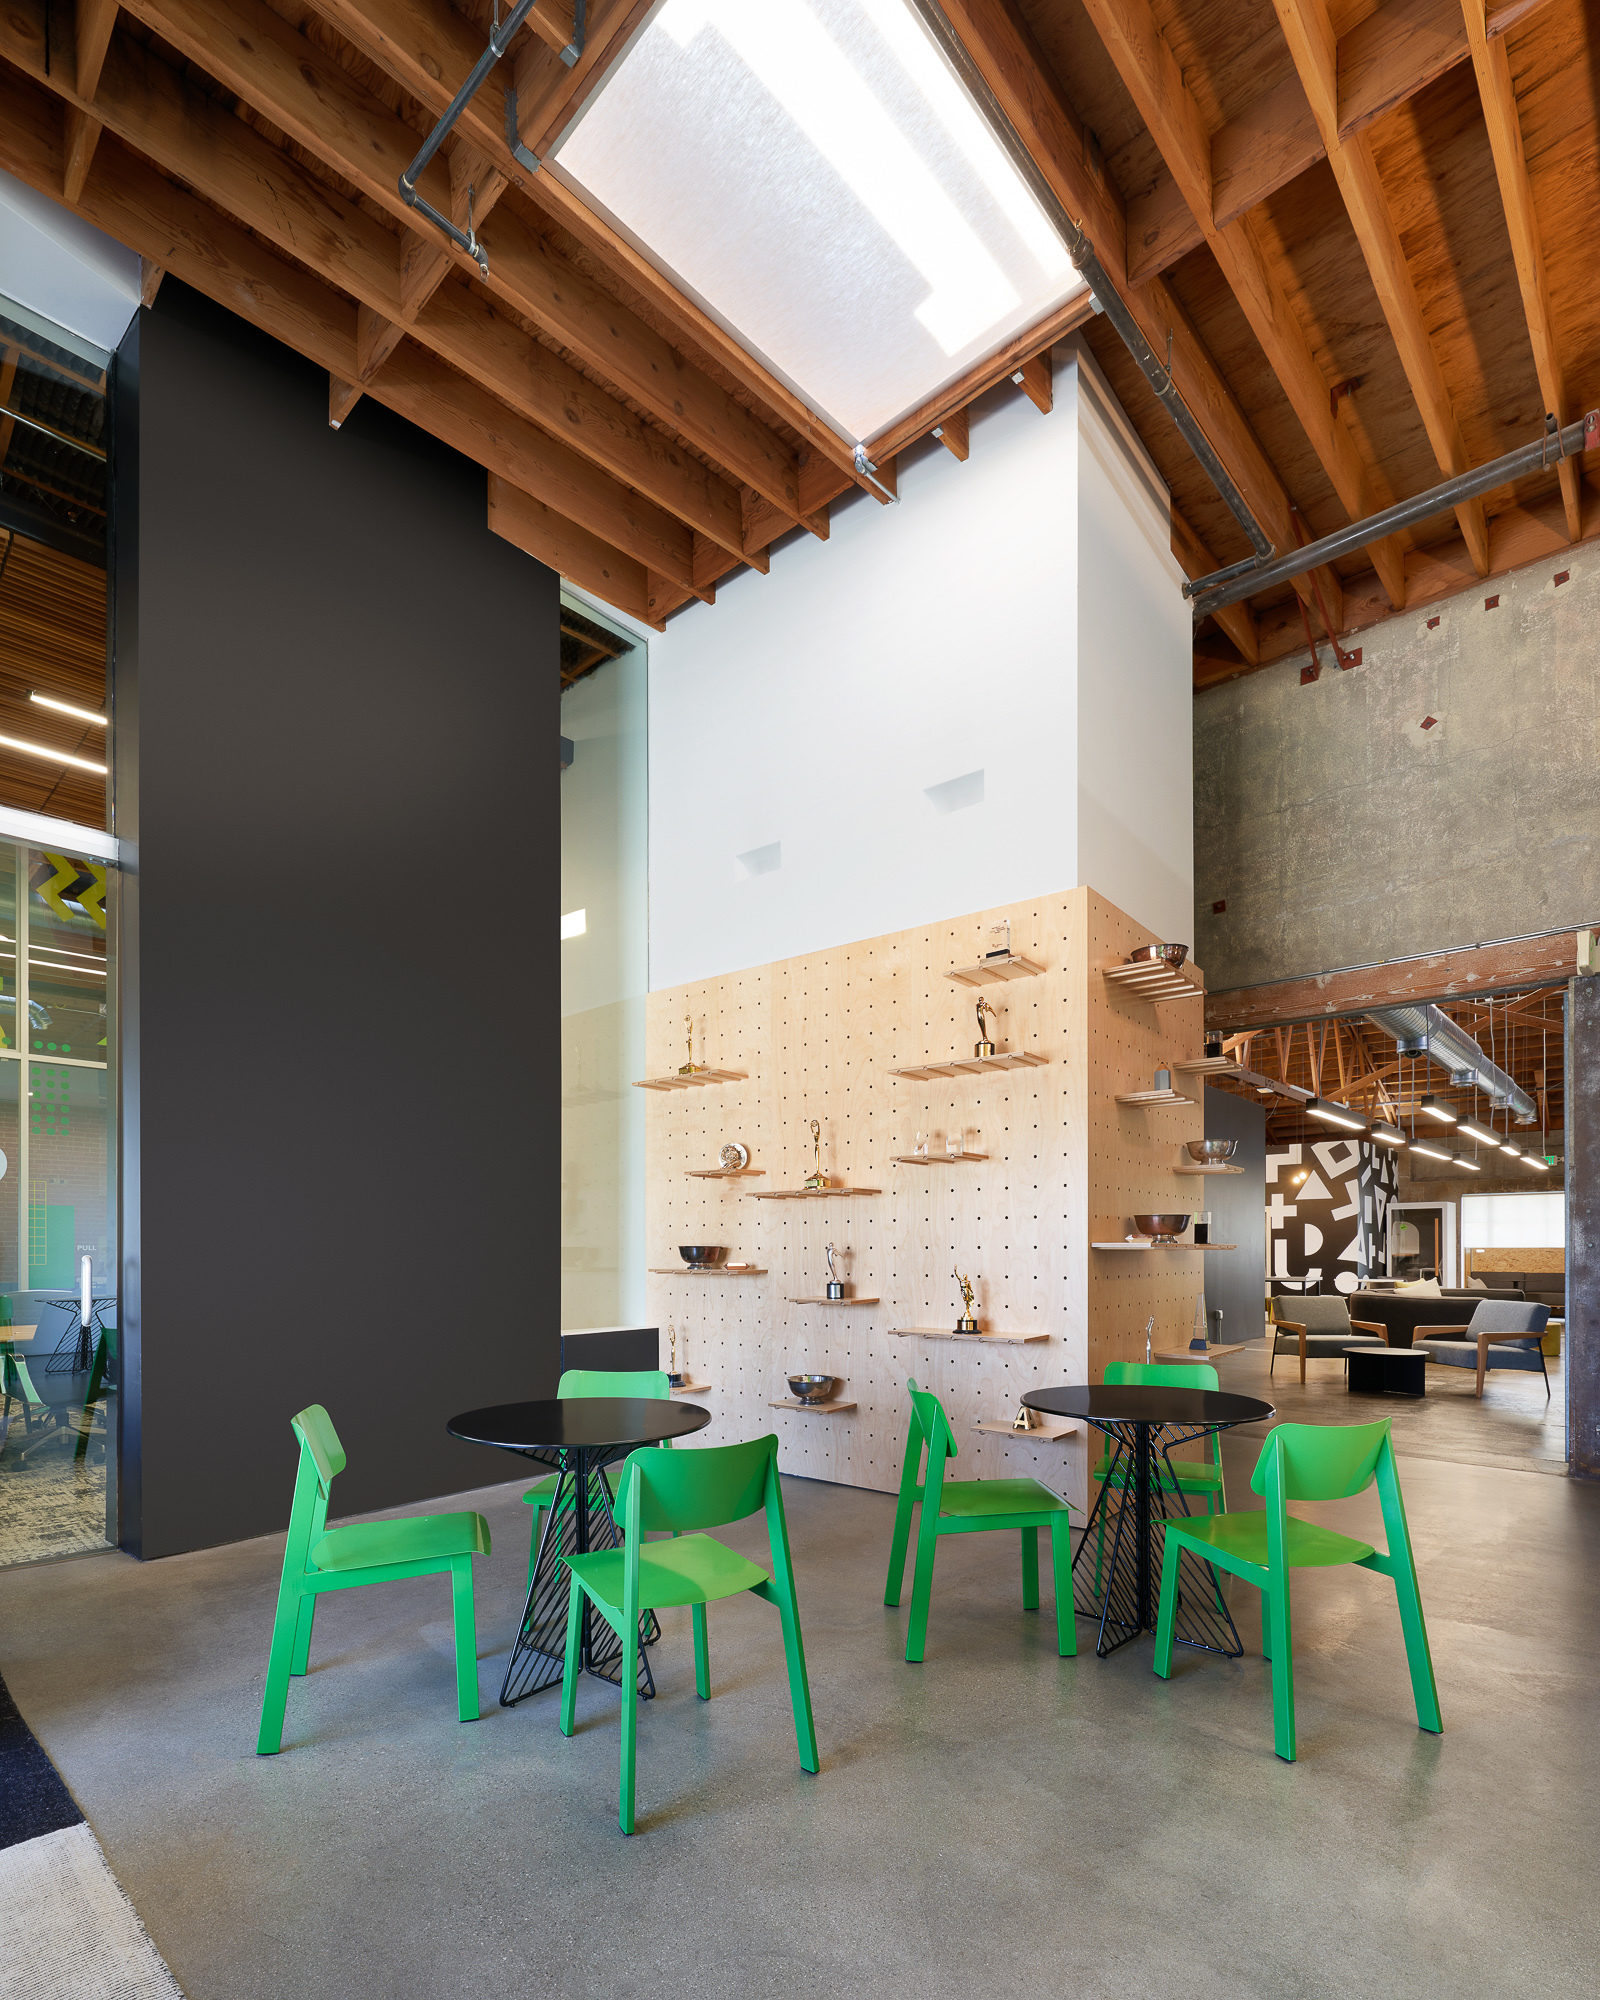 An office area featuring neon light green banquettes and black coffee tables